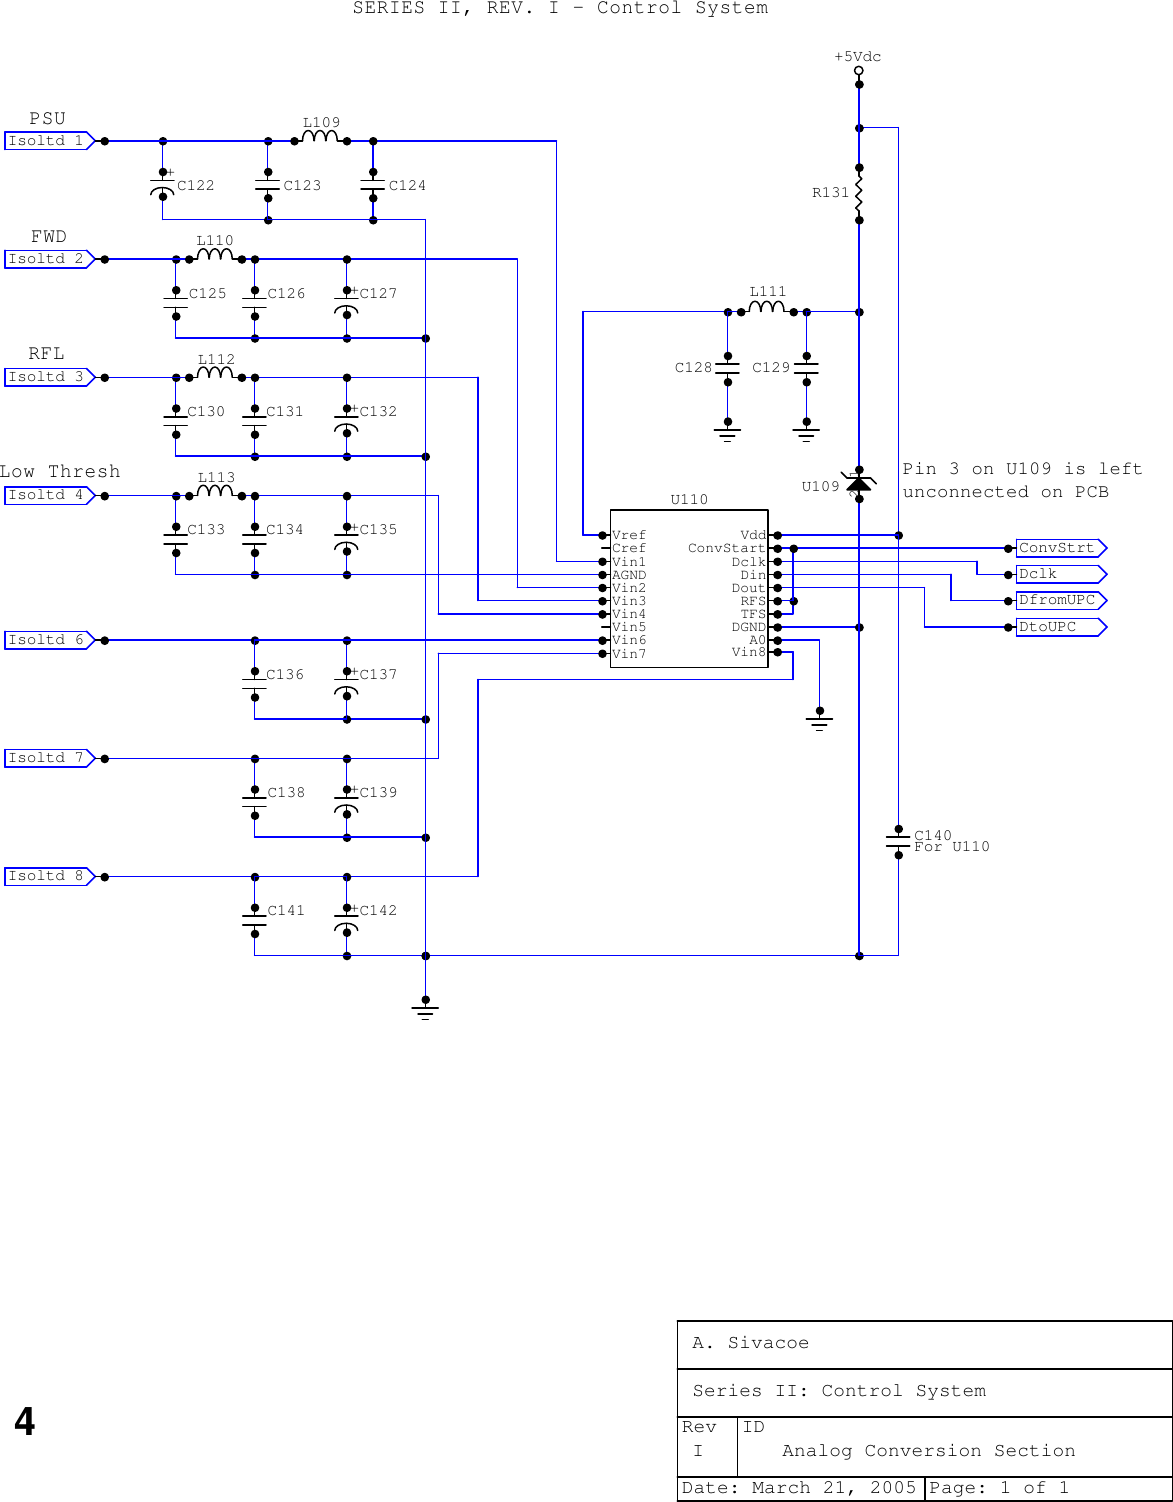 Pin 3 on U109 is left unconnected on PCB4FWDPSURFLLow ThreshSERIES II, REV. I - Control SystemC133L113C130L112C125L110C123L109C129C128L1112 1U109+5VdcFor U110C140+C142C141+C139C138+C137C136+C135C134+C132C131+C127C126C124+C122DtoUPC  DfromUPCDclk    ConvStrtIsoltd 1Isoltd 2Isoltd 3Isoltd 4Isoltd 6Isoltd 7Isoltd 8VrefCrefVin1AGNDVin2Vin3Vin4Vin5Vin6Vin7 Vin8A0DGNDTFSRFSDoutDinDclkConvStartVddU110R131A. SivacoeSeries II: Control SystemI Analog Conversion SectionDate: March 21, 2005 Page: 1 of 1Rev ID